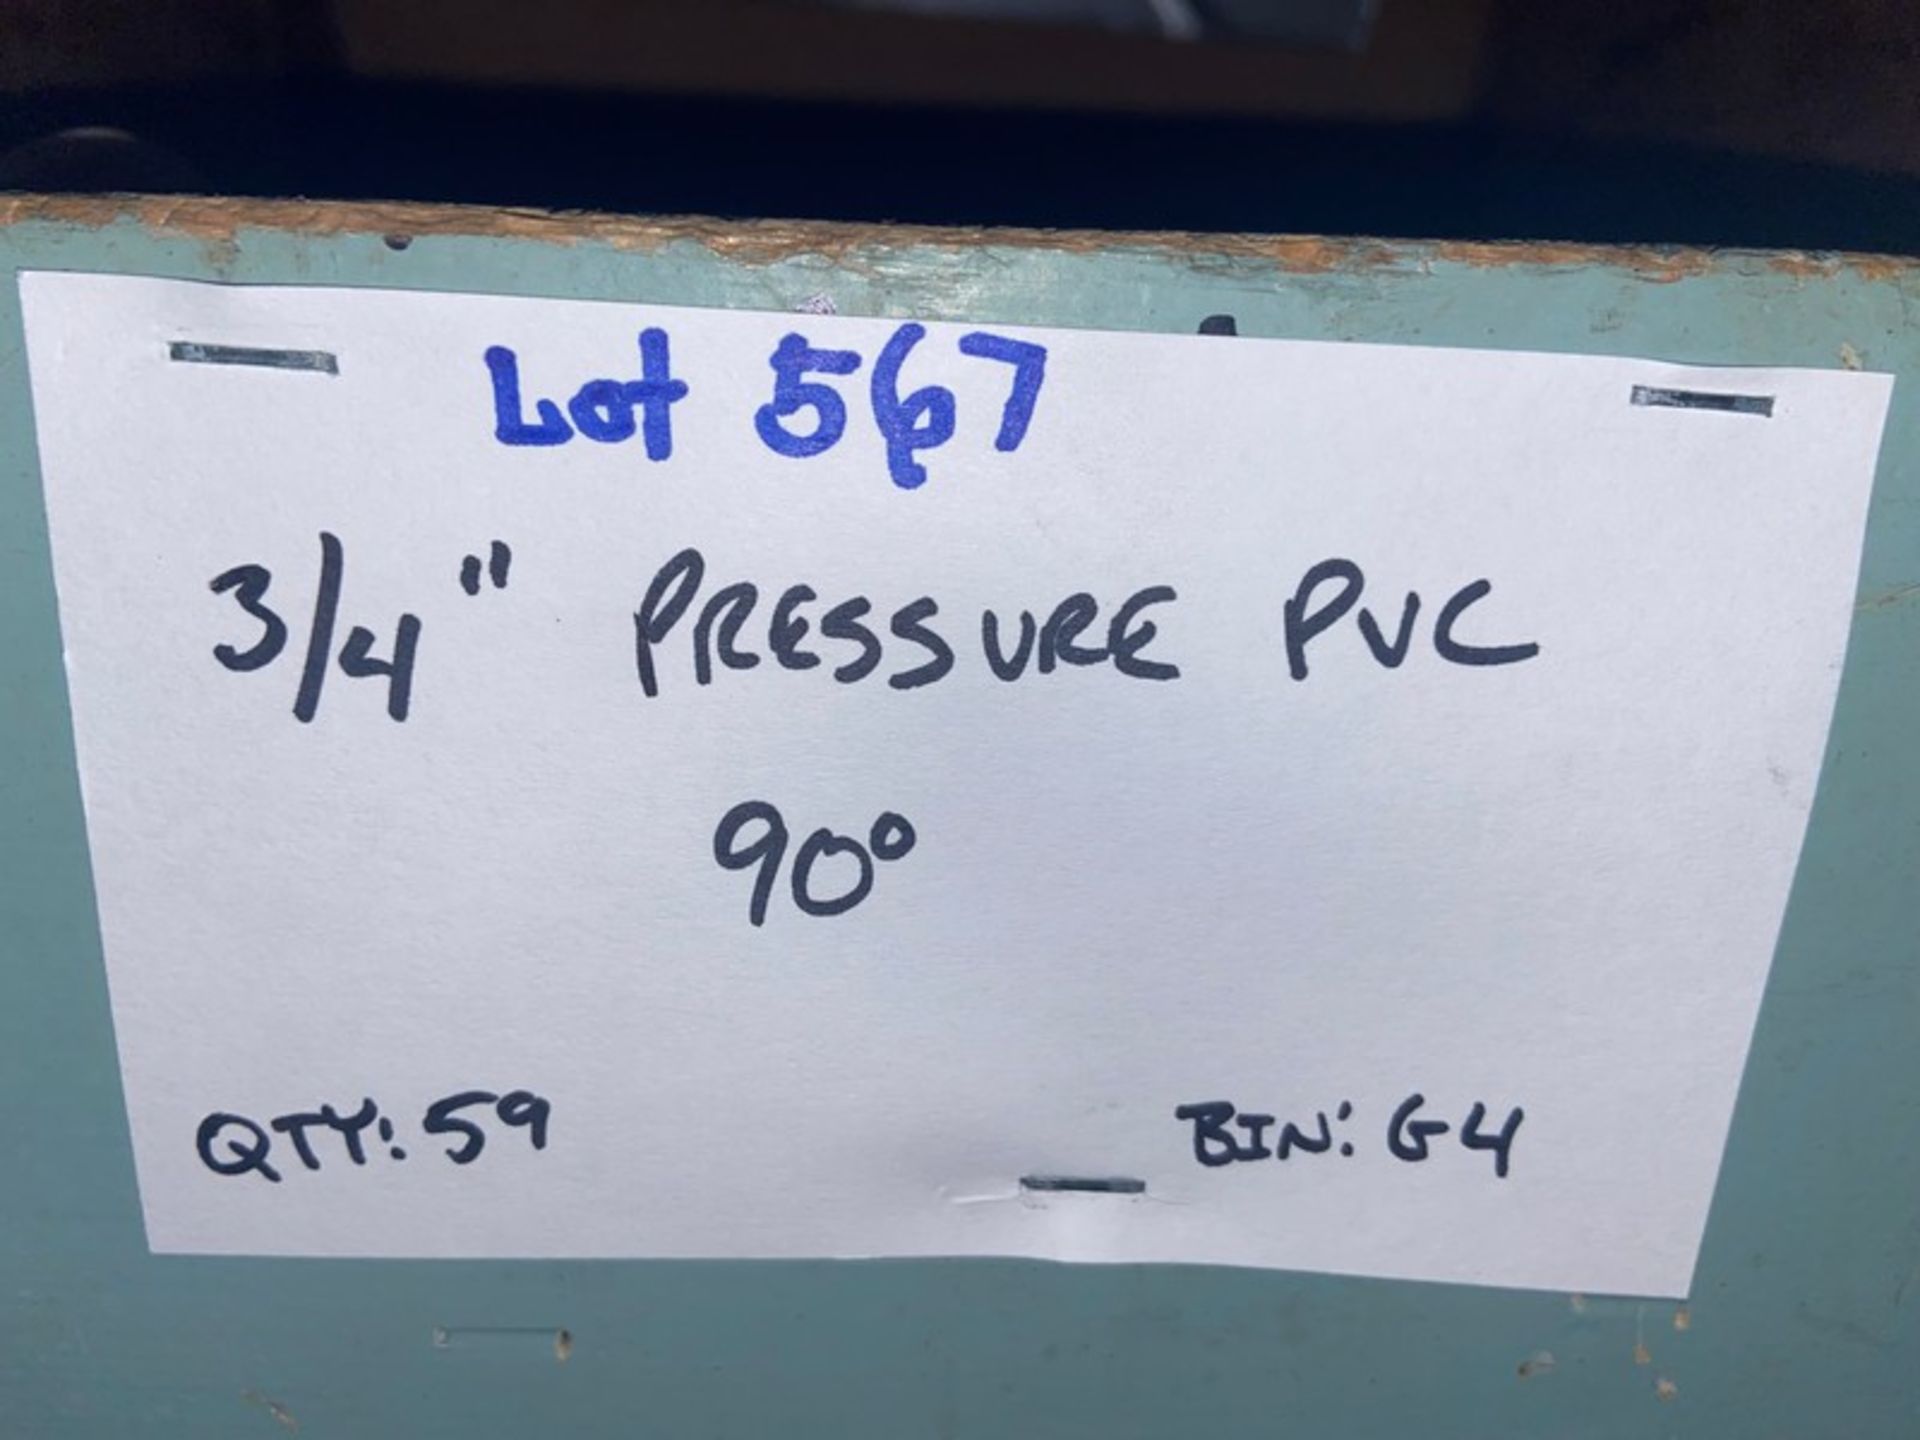 (59) 3/4 Pressure PVC 90’ (Bin:G4) (LOCATED IN MONROEVILLE, PA) - Image 4 of 6